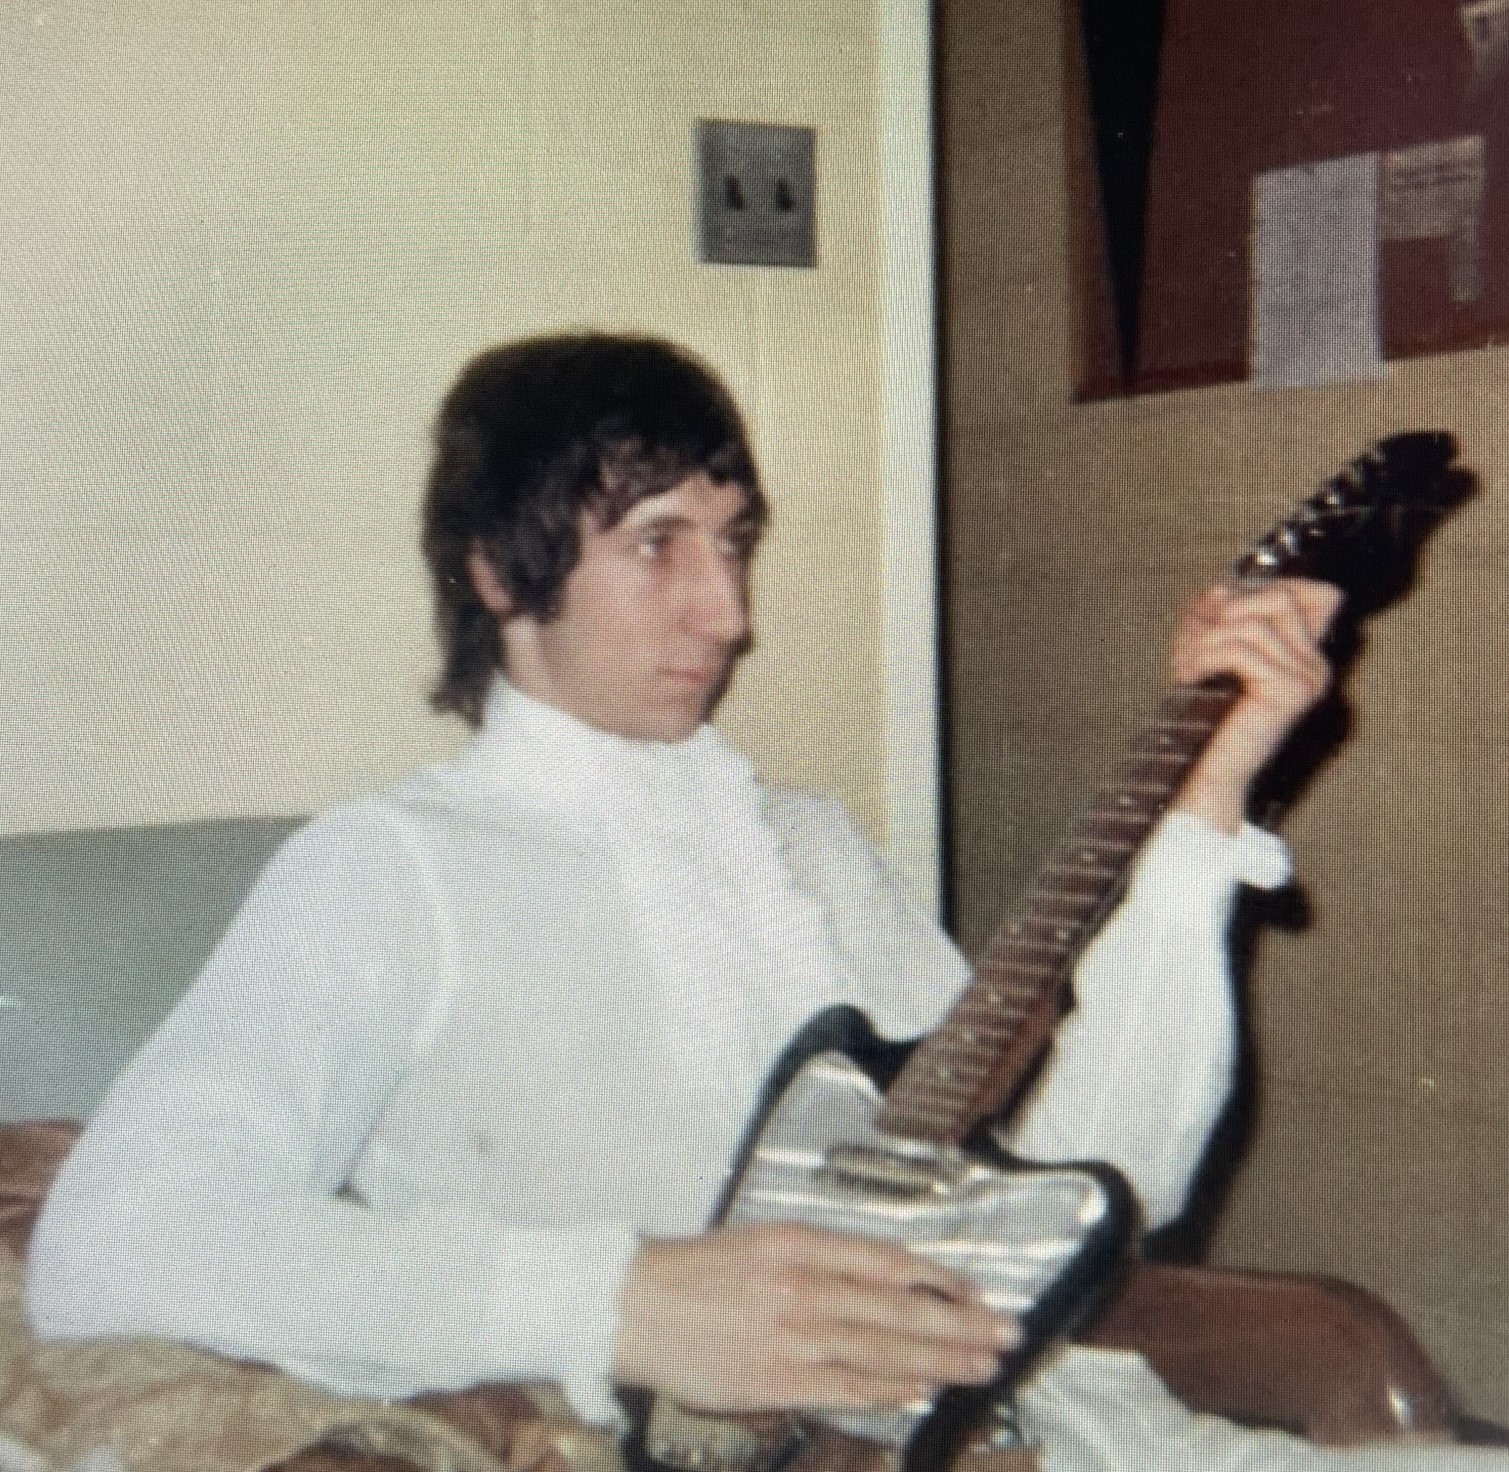 Townshend with his Cornet Hornet guitar in the teachers' lounge, used as The Who's dressing room, at Union Catholic.